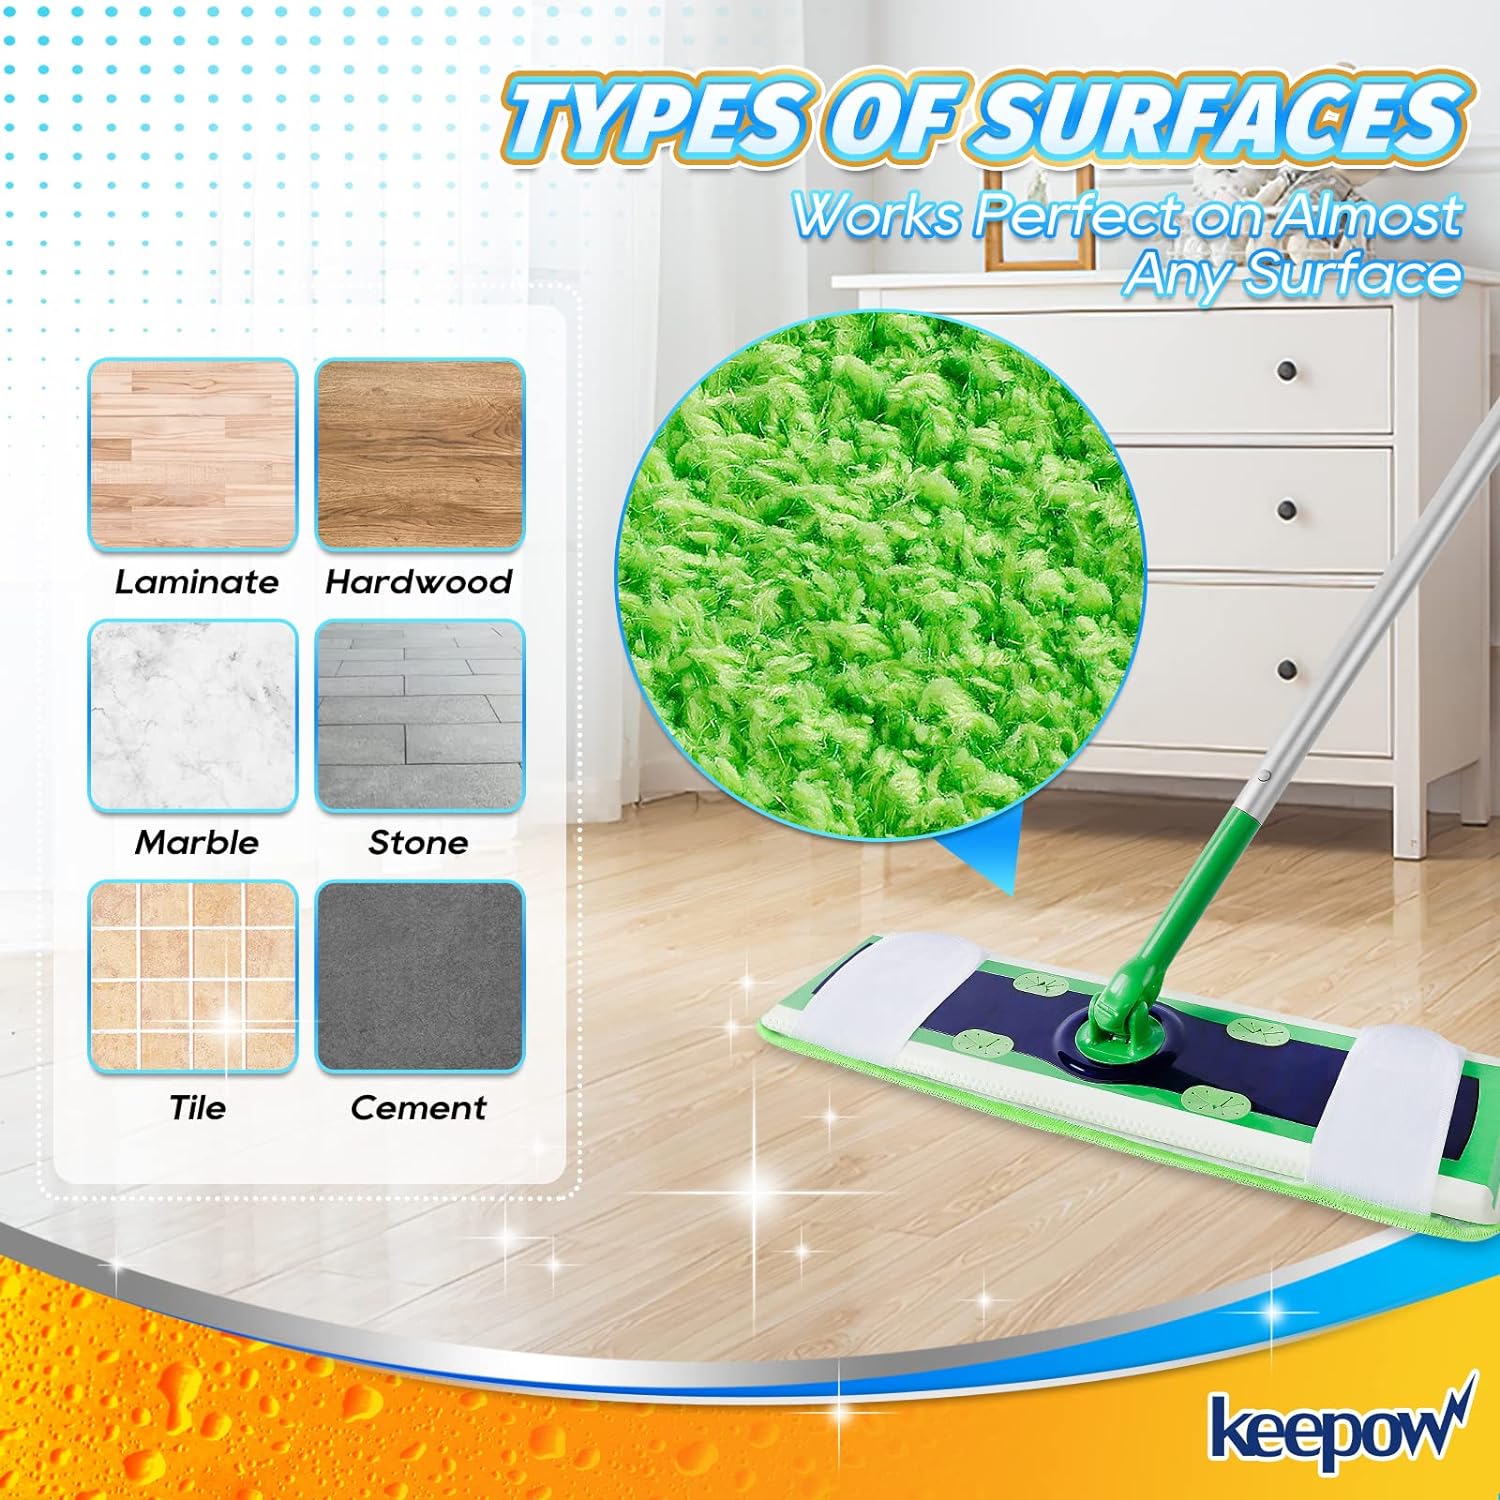 KEEPOW 5702M Microfiber Pads for All 17*5 Inches Flat Mop 4 Pcs